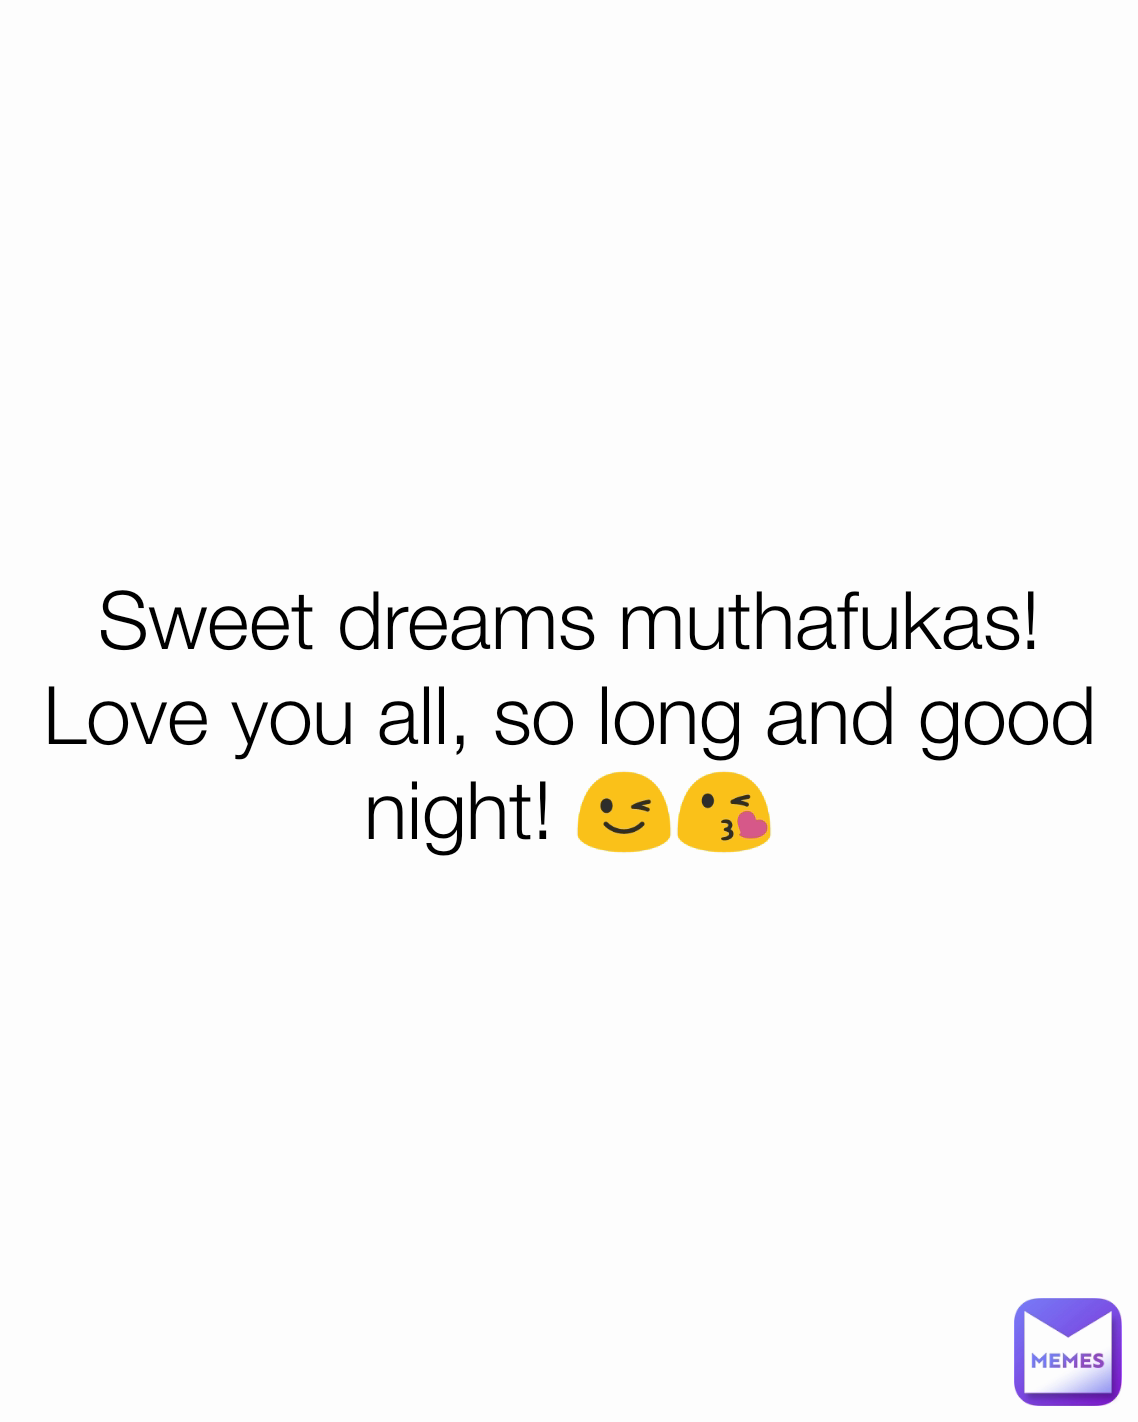 Sweet dreams muthafukas! Love you all, so long and good night! 😉😘